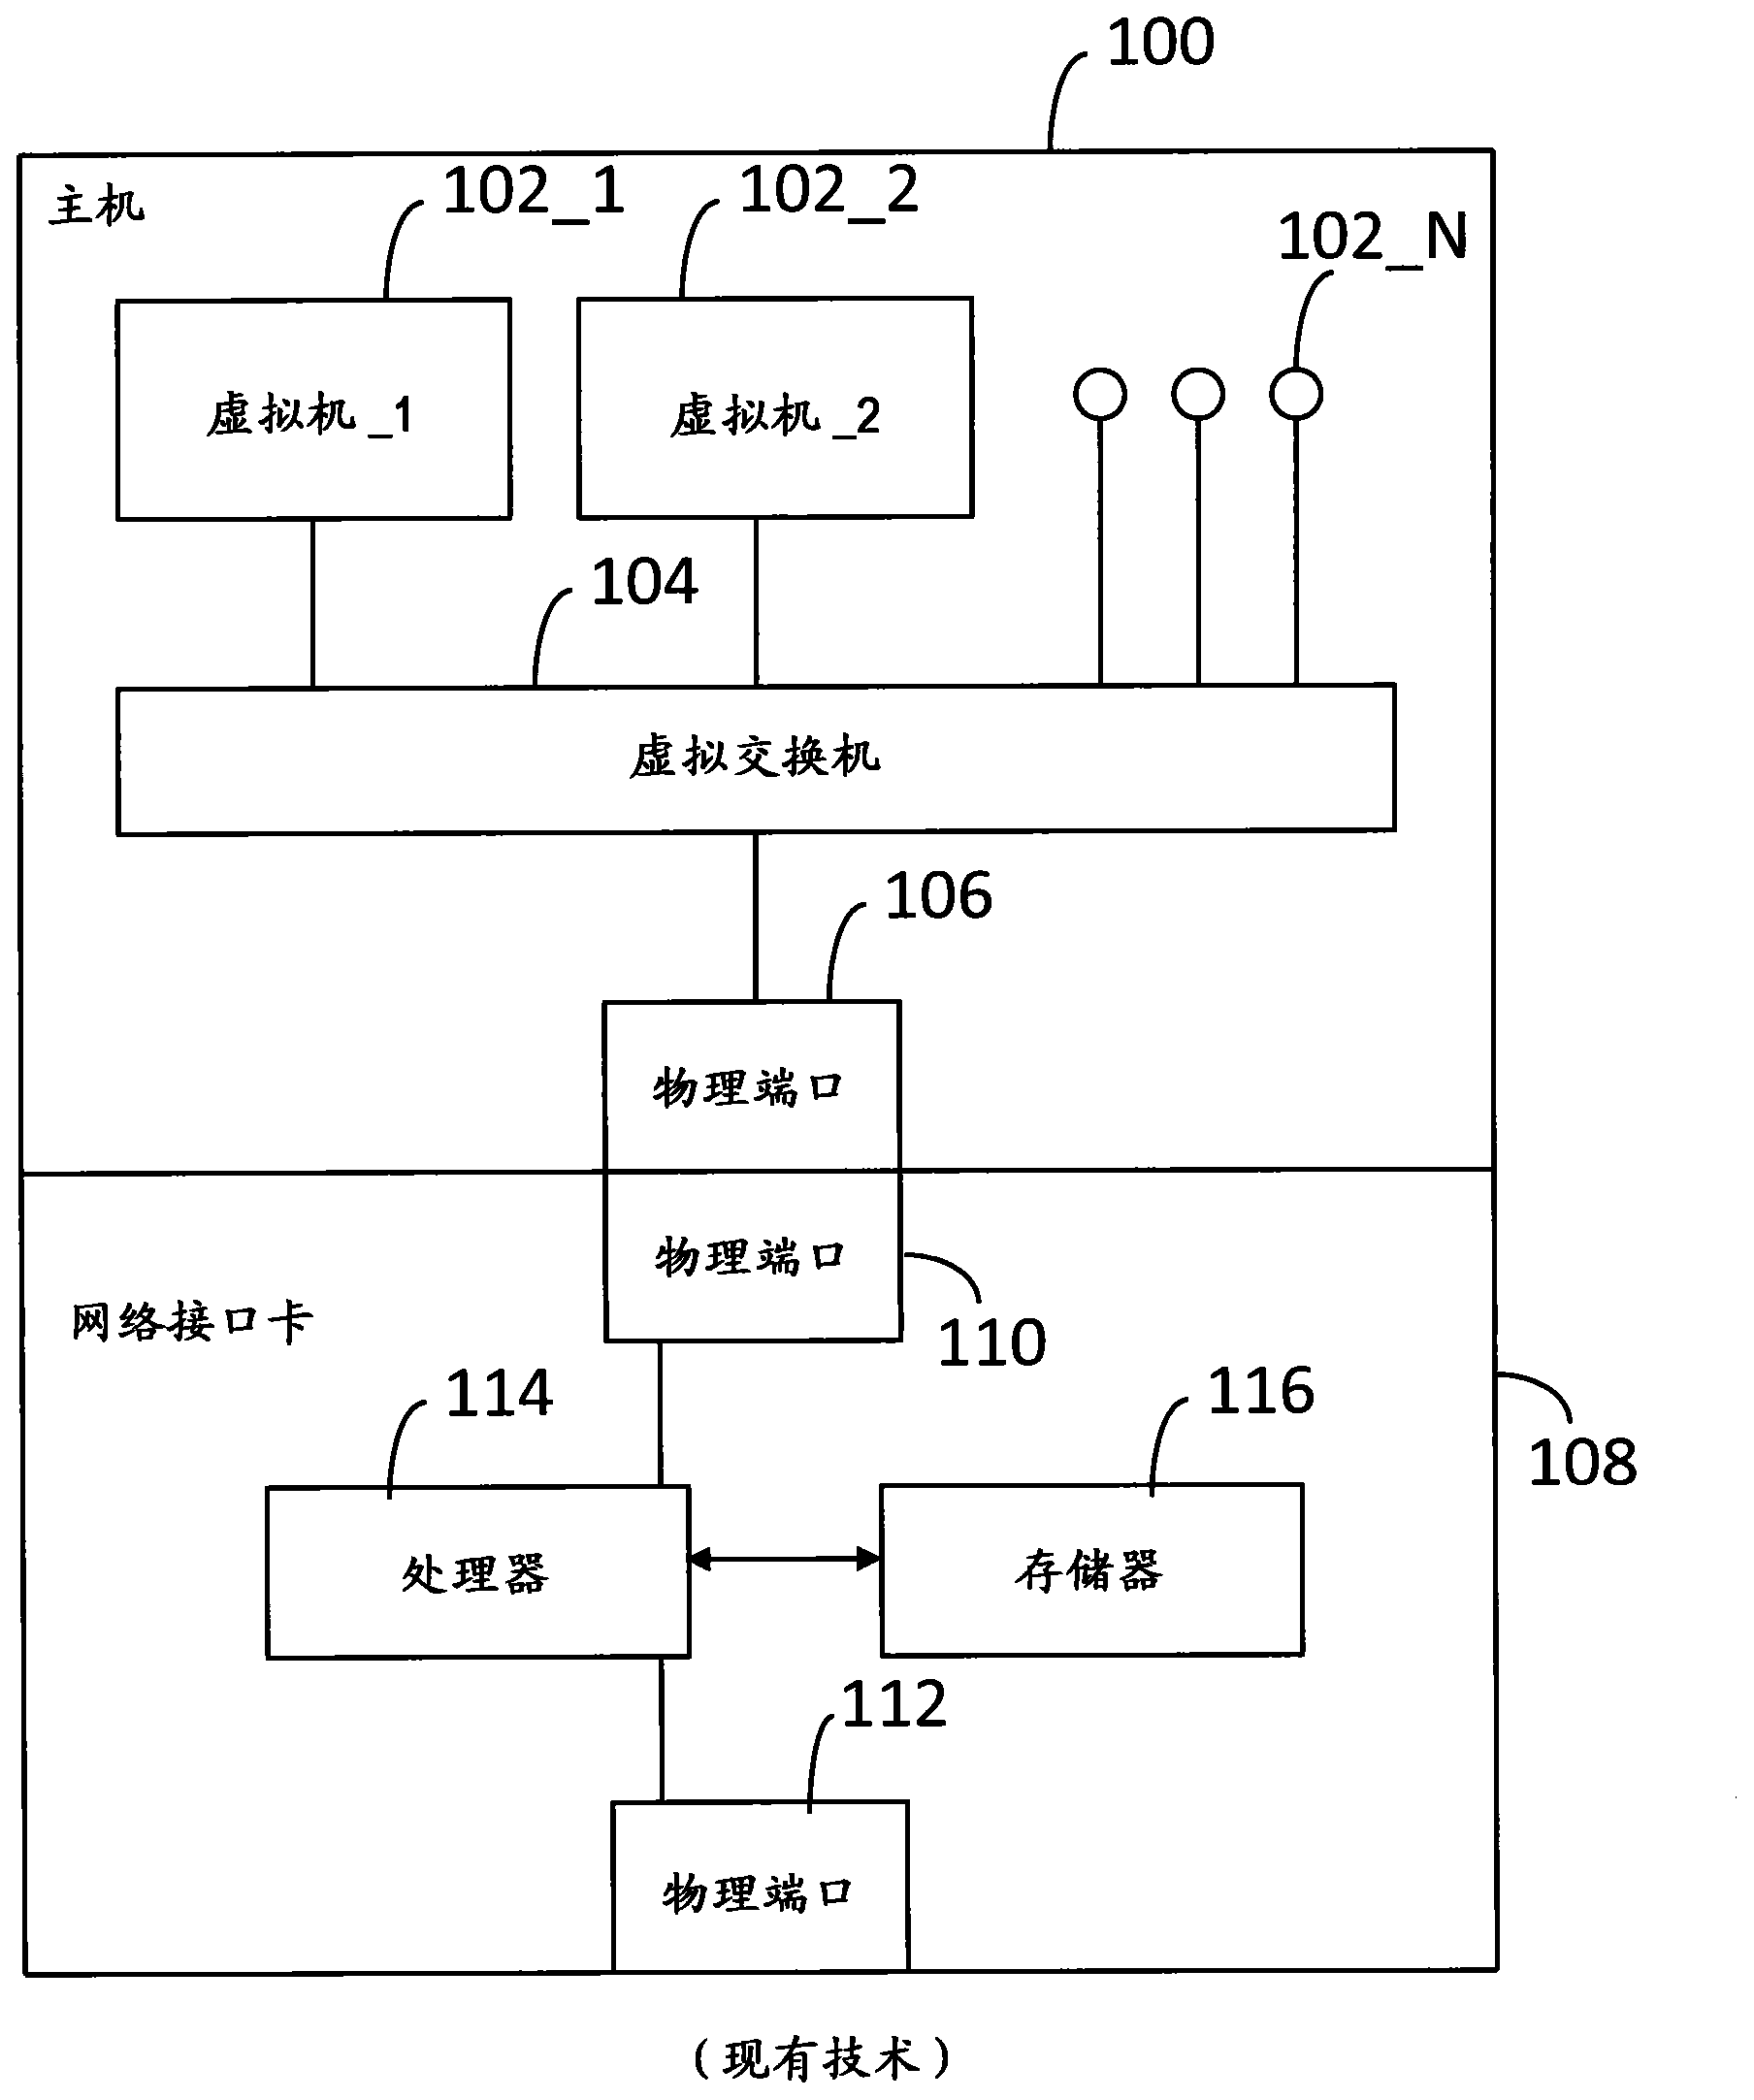 Network interface card with virtual switch and traffic flow policy enforcement